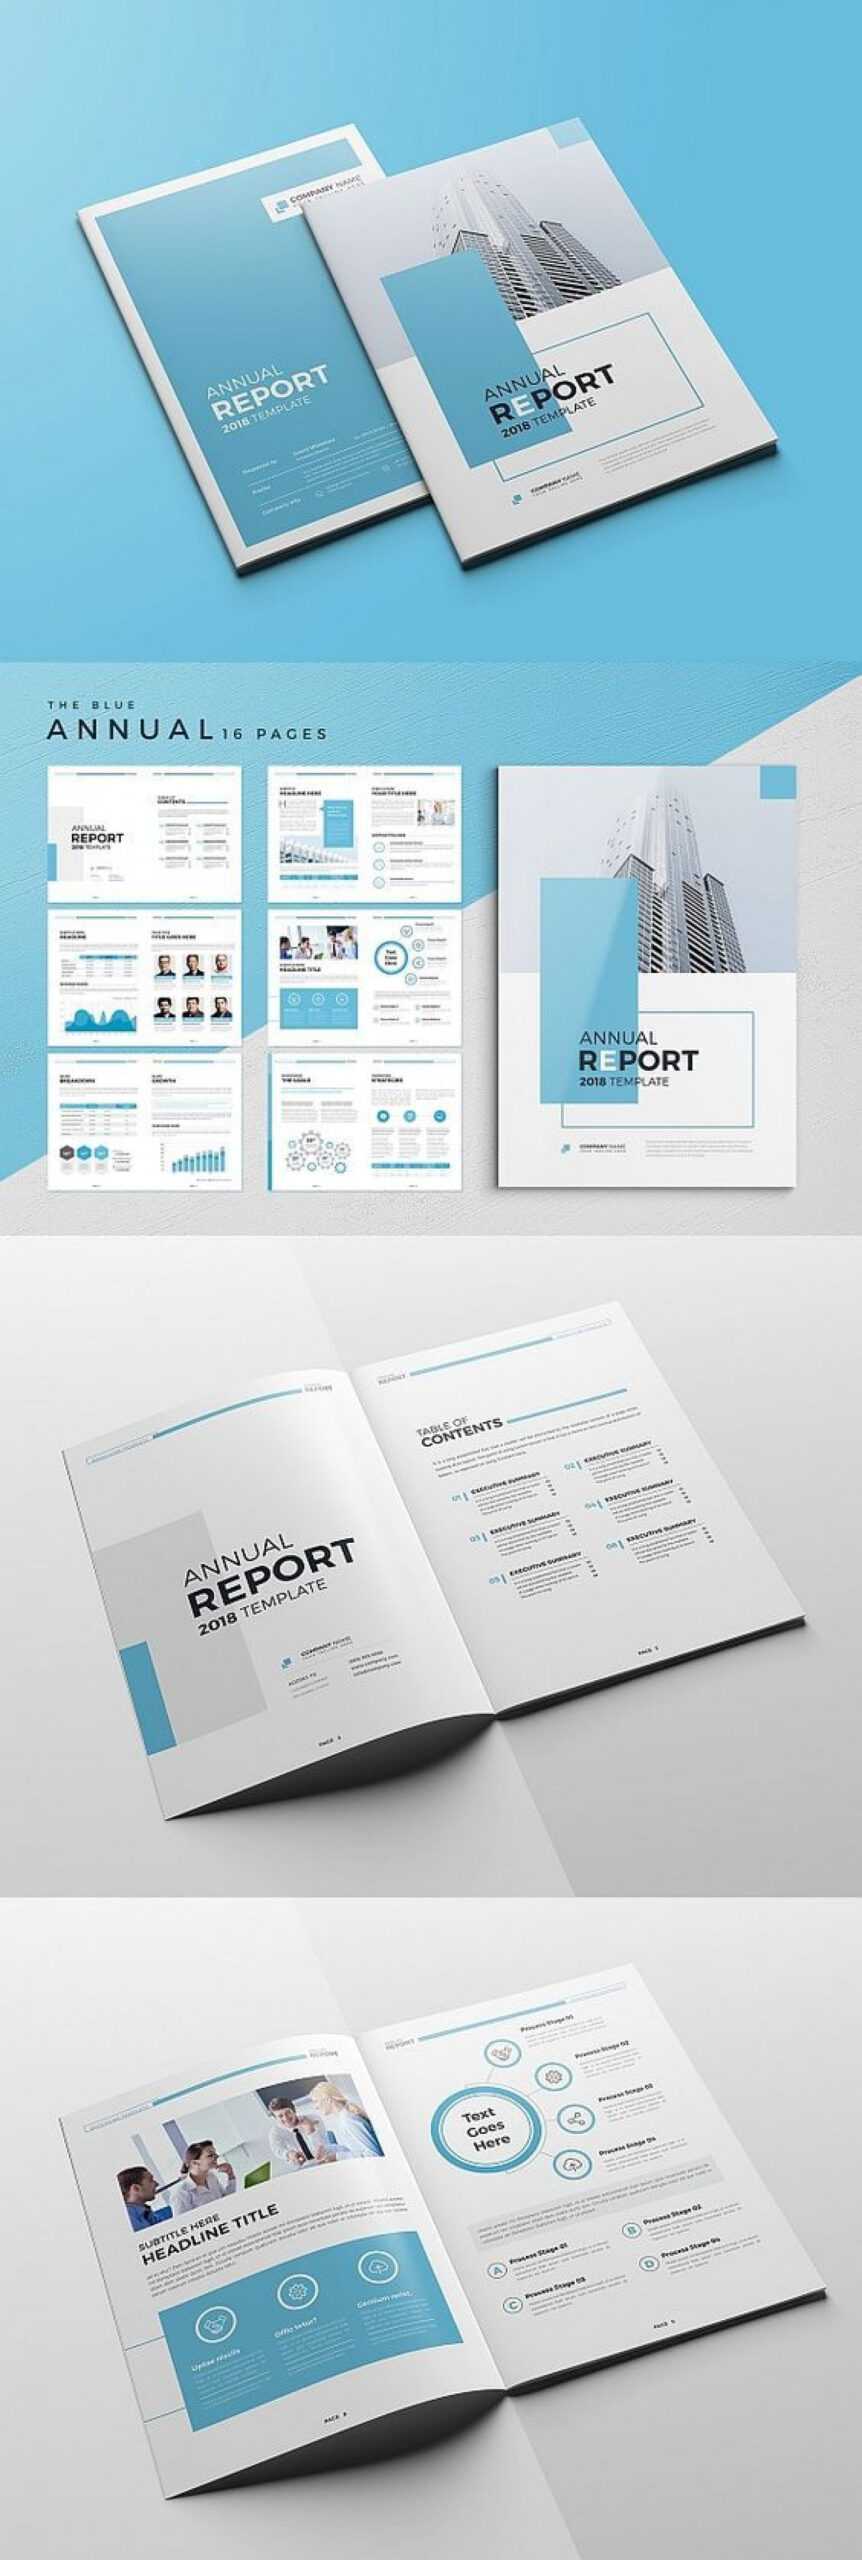 010 Creative Annual Report Template Word Marvelous Ideas With Annual Report Template Word